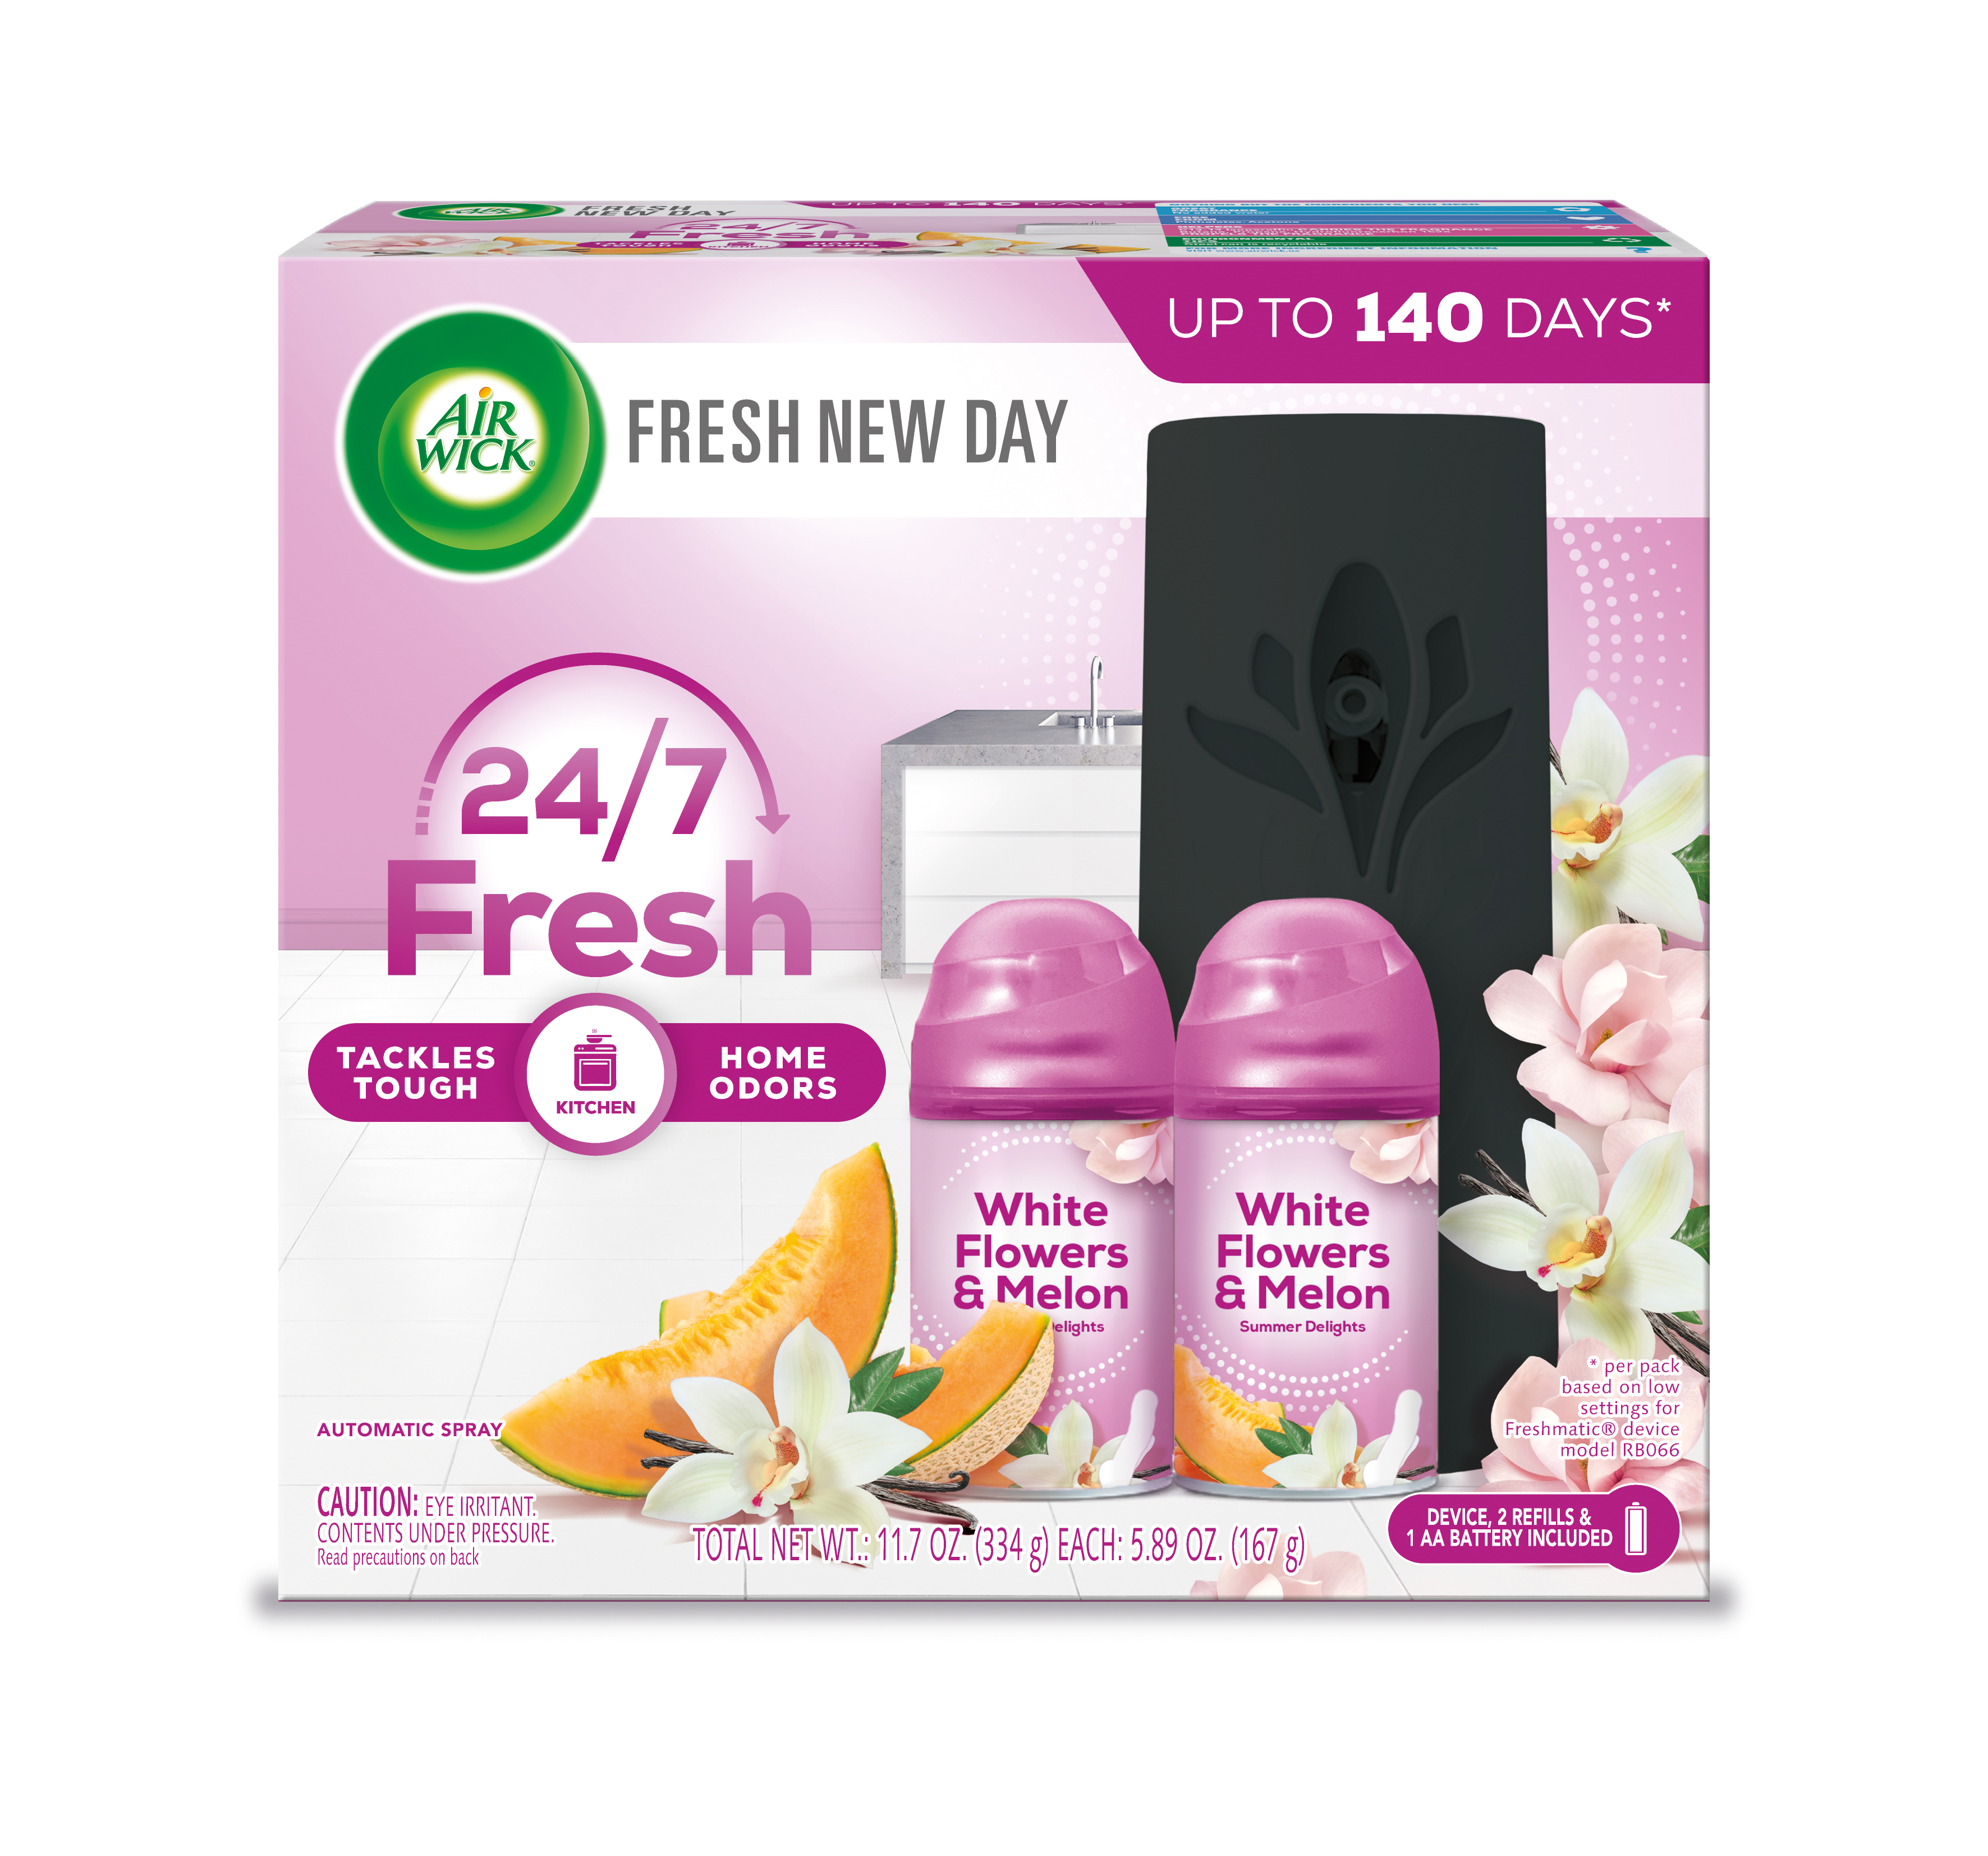 AIR WICK® Automatic Spray - White Flowers & Melon Summer Delights - Kit